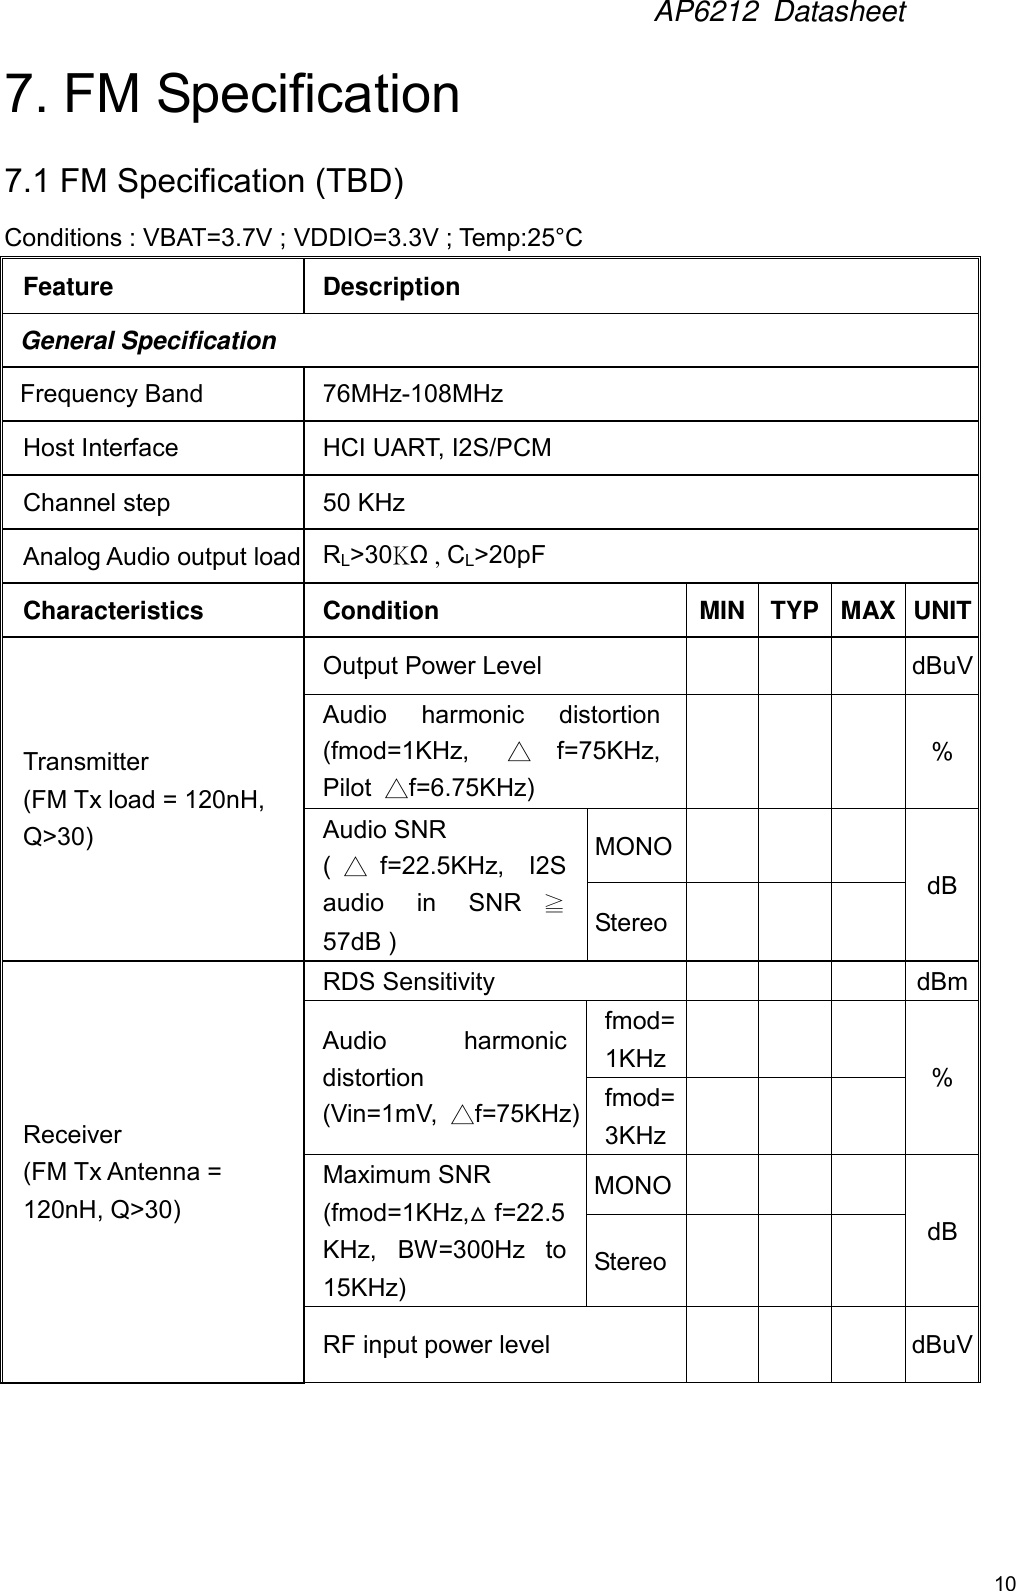 AP6212  Datasheet10 7. FM Specification7.1 FM Specification (TBD) Conditions : VBAT=3.7V ; VDDIO=3.3V ; Temp:25°CFeature Description General Specification Frequency Band 76MHz-108MHz Host Interface HCI UART, I2S/PCM Channel step 50 KHz Analog Audio output load RL&gt;30KΩ, CL&gt;20pF Characteristics Condition MIN TYP MAX UNIT Transmitter   (FM Tx load = 120nH, Q&gt;30)Output Power Level dBuV Audio  harmonic  distortion (fmod=1KHz,  △f=75KHz,Pilot  △f=6.75KHz) % Audio SNR (△f=22.5KHz,  I2Saudio  in  SNR ≧57dB ) MONO dB Stereo Receiver (FM Tx Antenna = 120nH, Q&gt;30) RDS Sensitivity dBm Audio  harmonic distortion (Vin=1mV,  △f=75KHz) fmod=1KHz % fmod=3KHz Maximum SNR (fmod=1KHz,△f=22.5KHz,  BW=300Hz  to 15KHz) MONO dB Stereo RF input power level dBuV 